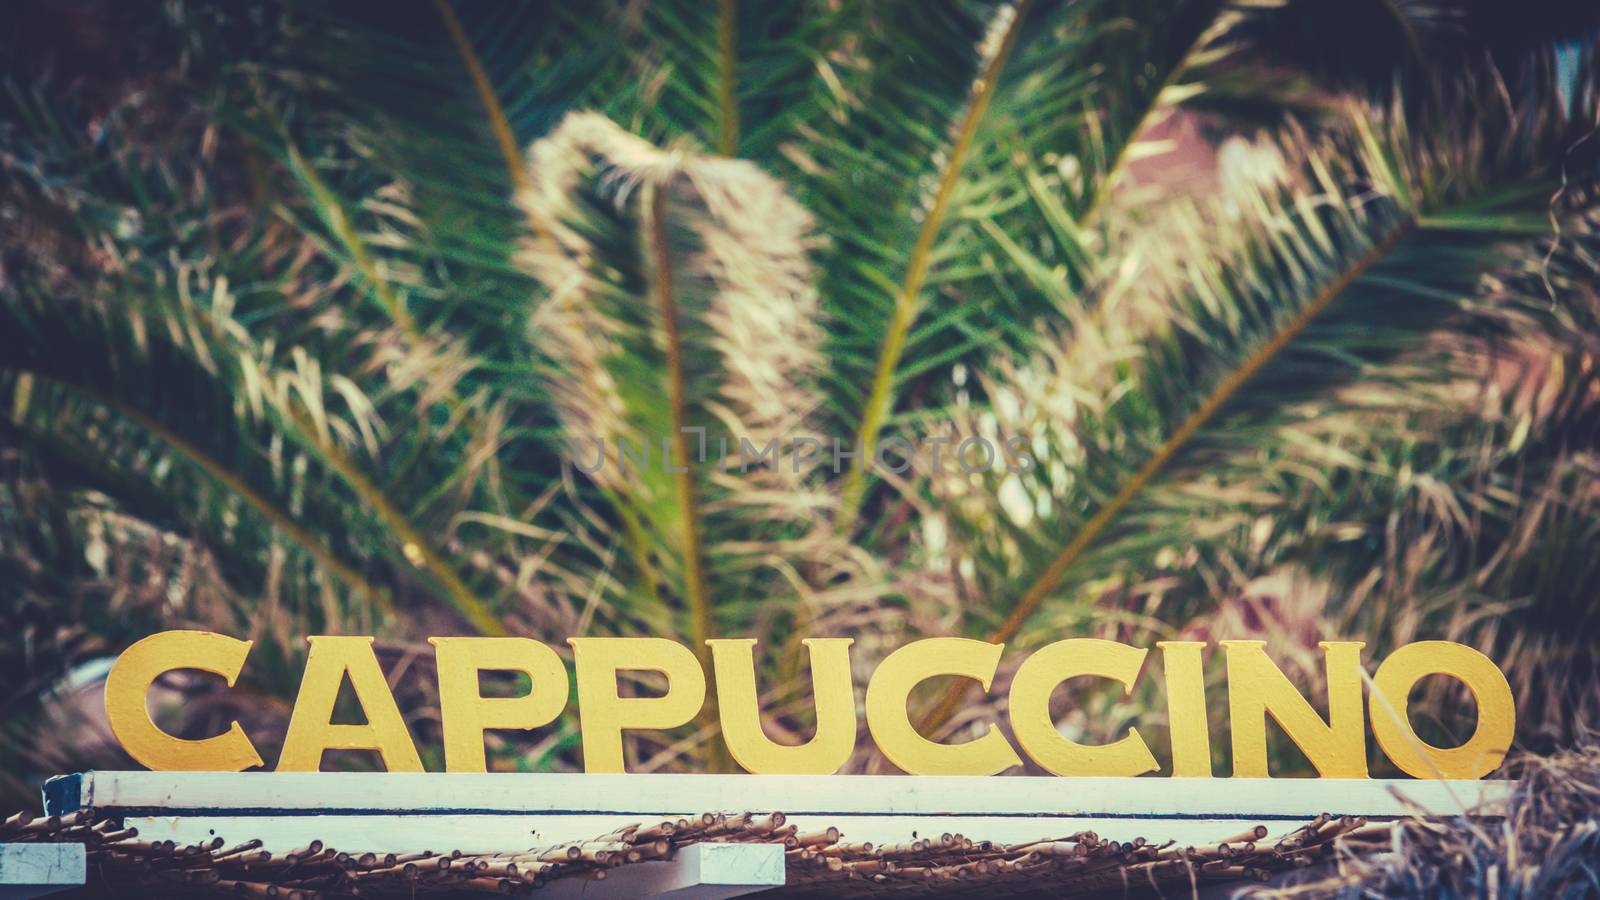 Beach Cafe Cappuccino Sign by mrdoomits